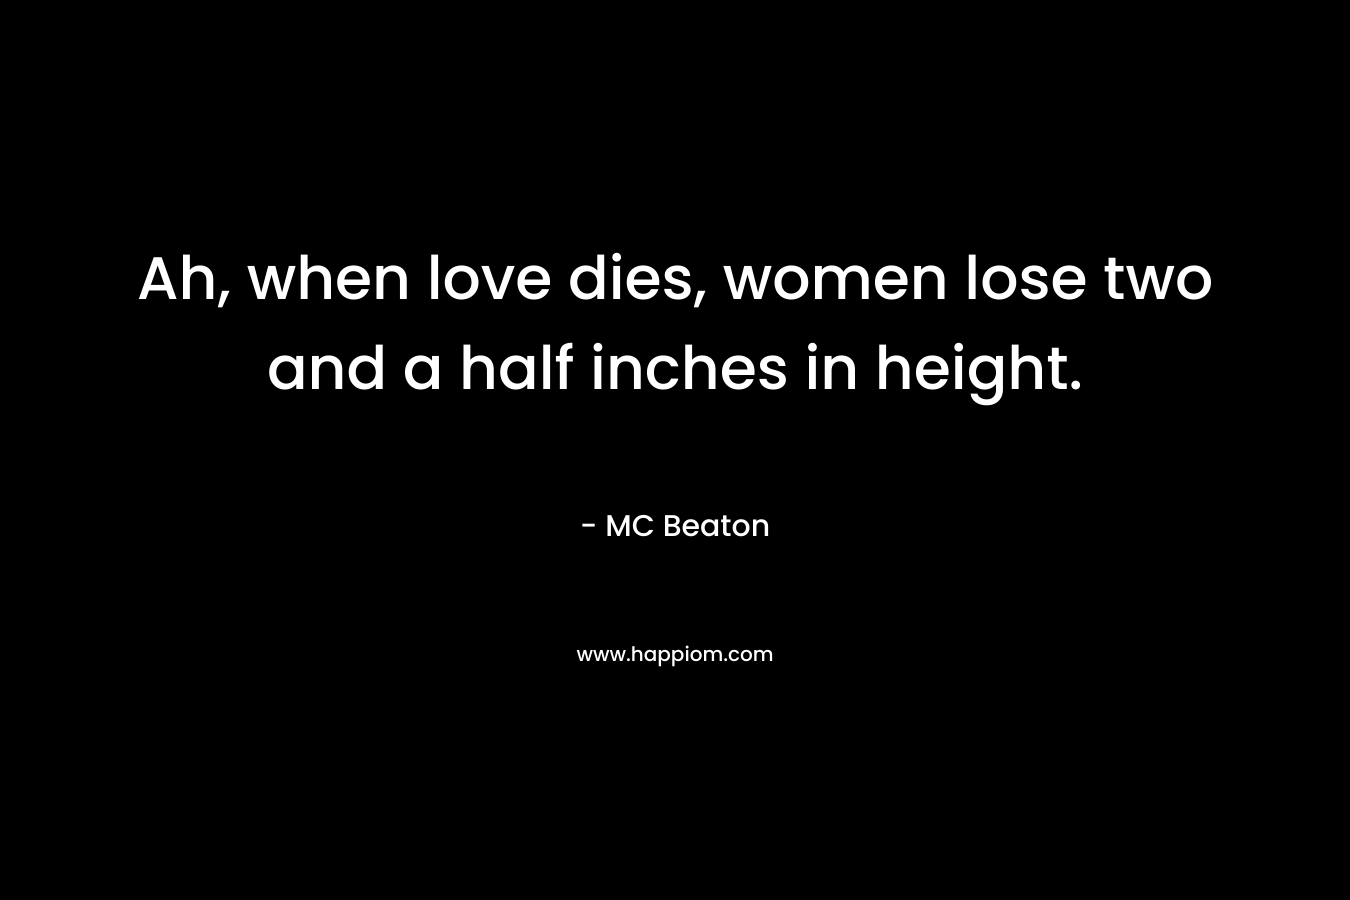 Ah, when love dies, women lose two and a half inches in height.